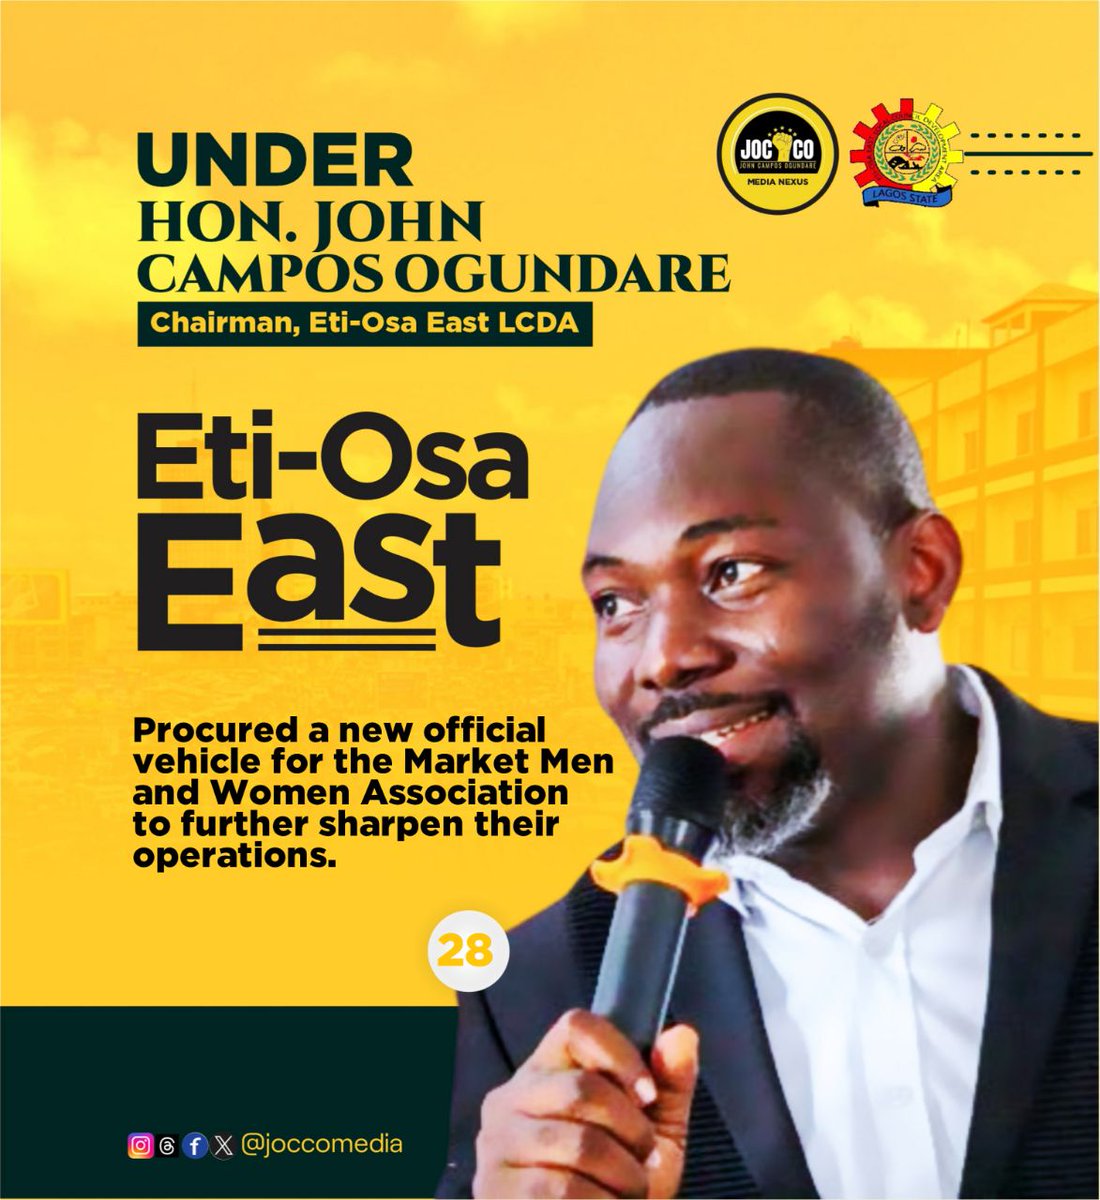 Episode 34

Attached is a flyer of what Eti-Osa East has done under the leadership of Hon. John Ogundare Campos. 

Watch out for more! 

#transportation&procurement
#evidencedey
#JoccoIsWorking 
#expectmore

Jocco Media Nexus